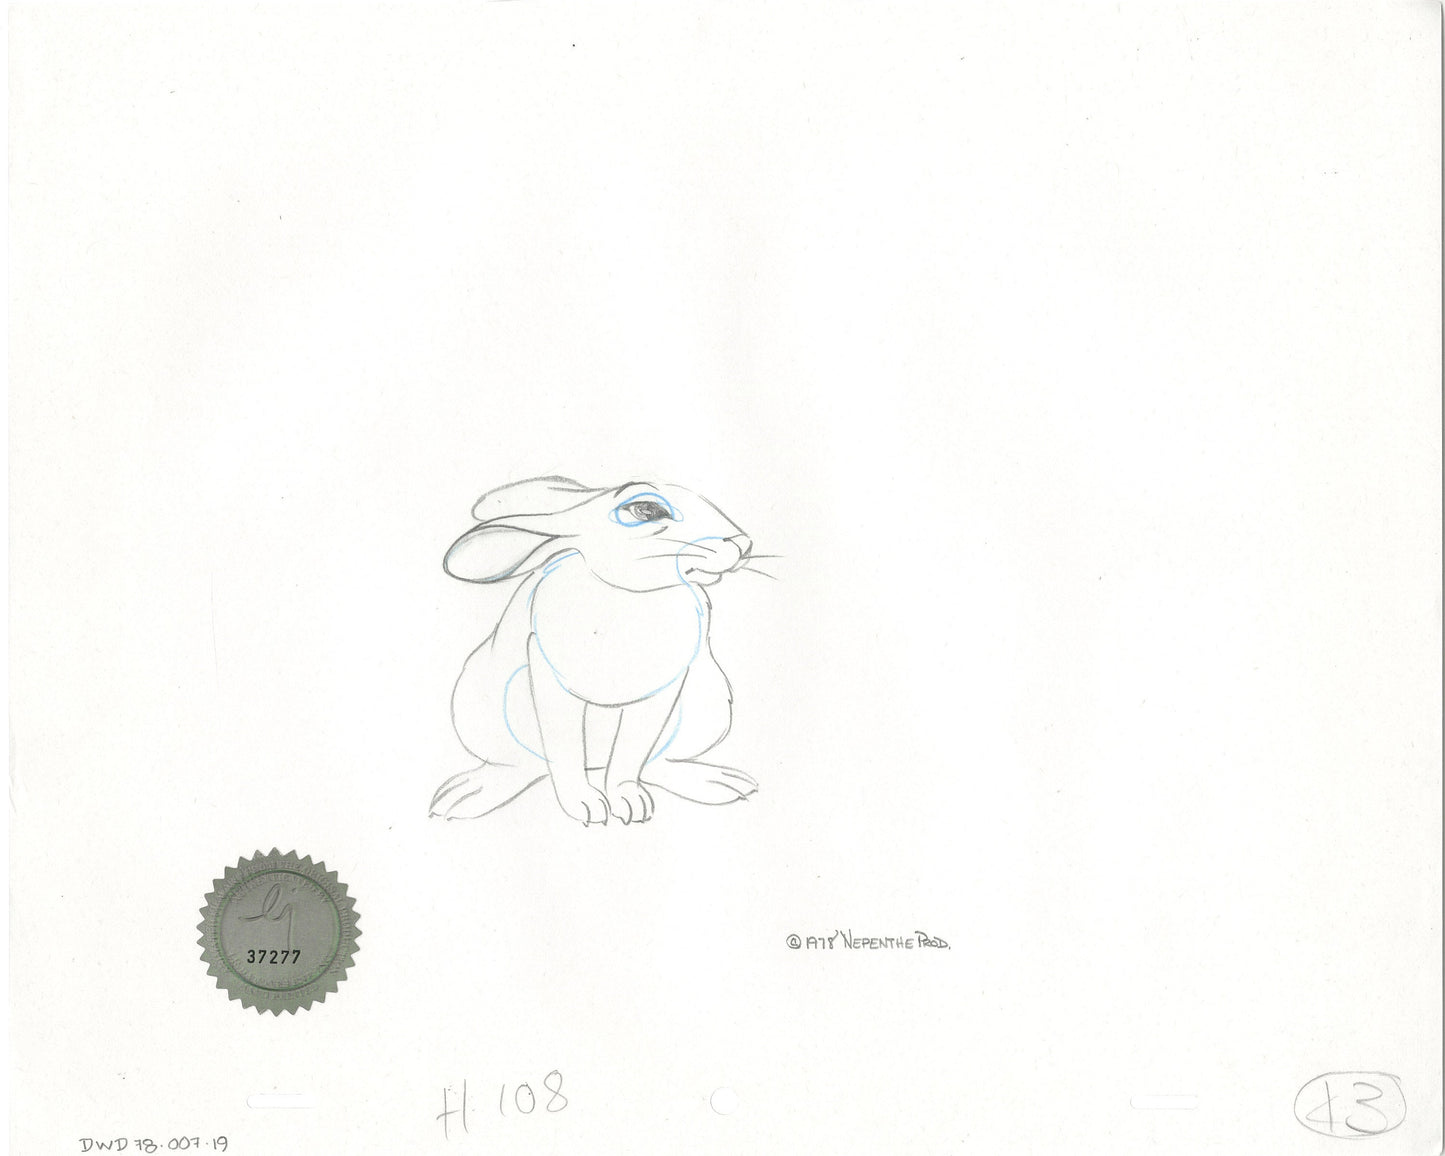 Watership Down 1978 Production Animation Cel Drawing with Linda Jones Enterprise Seal and Certificate of Authenticity 007-019